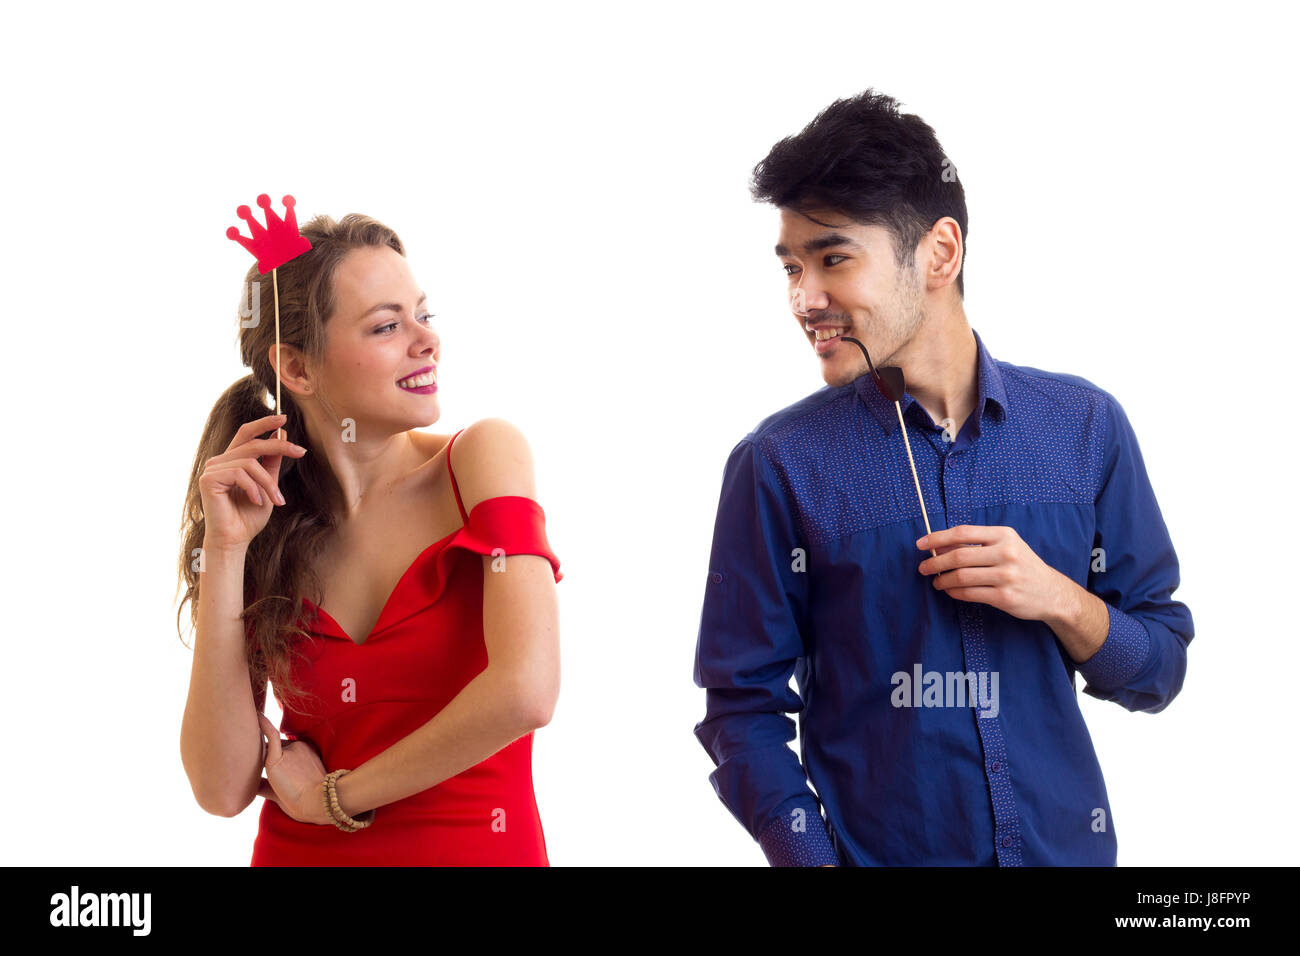 Young smiling woman with long blond hair in red dress and young handsome man with dark hair in blue shirt holding cardboard sticks of smoking pipe and Stock Photo